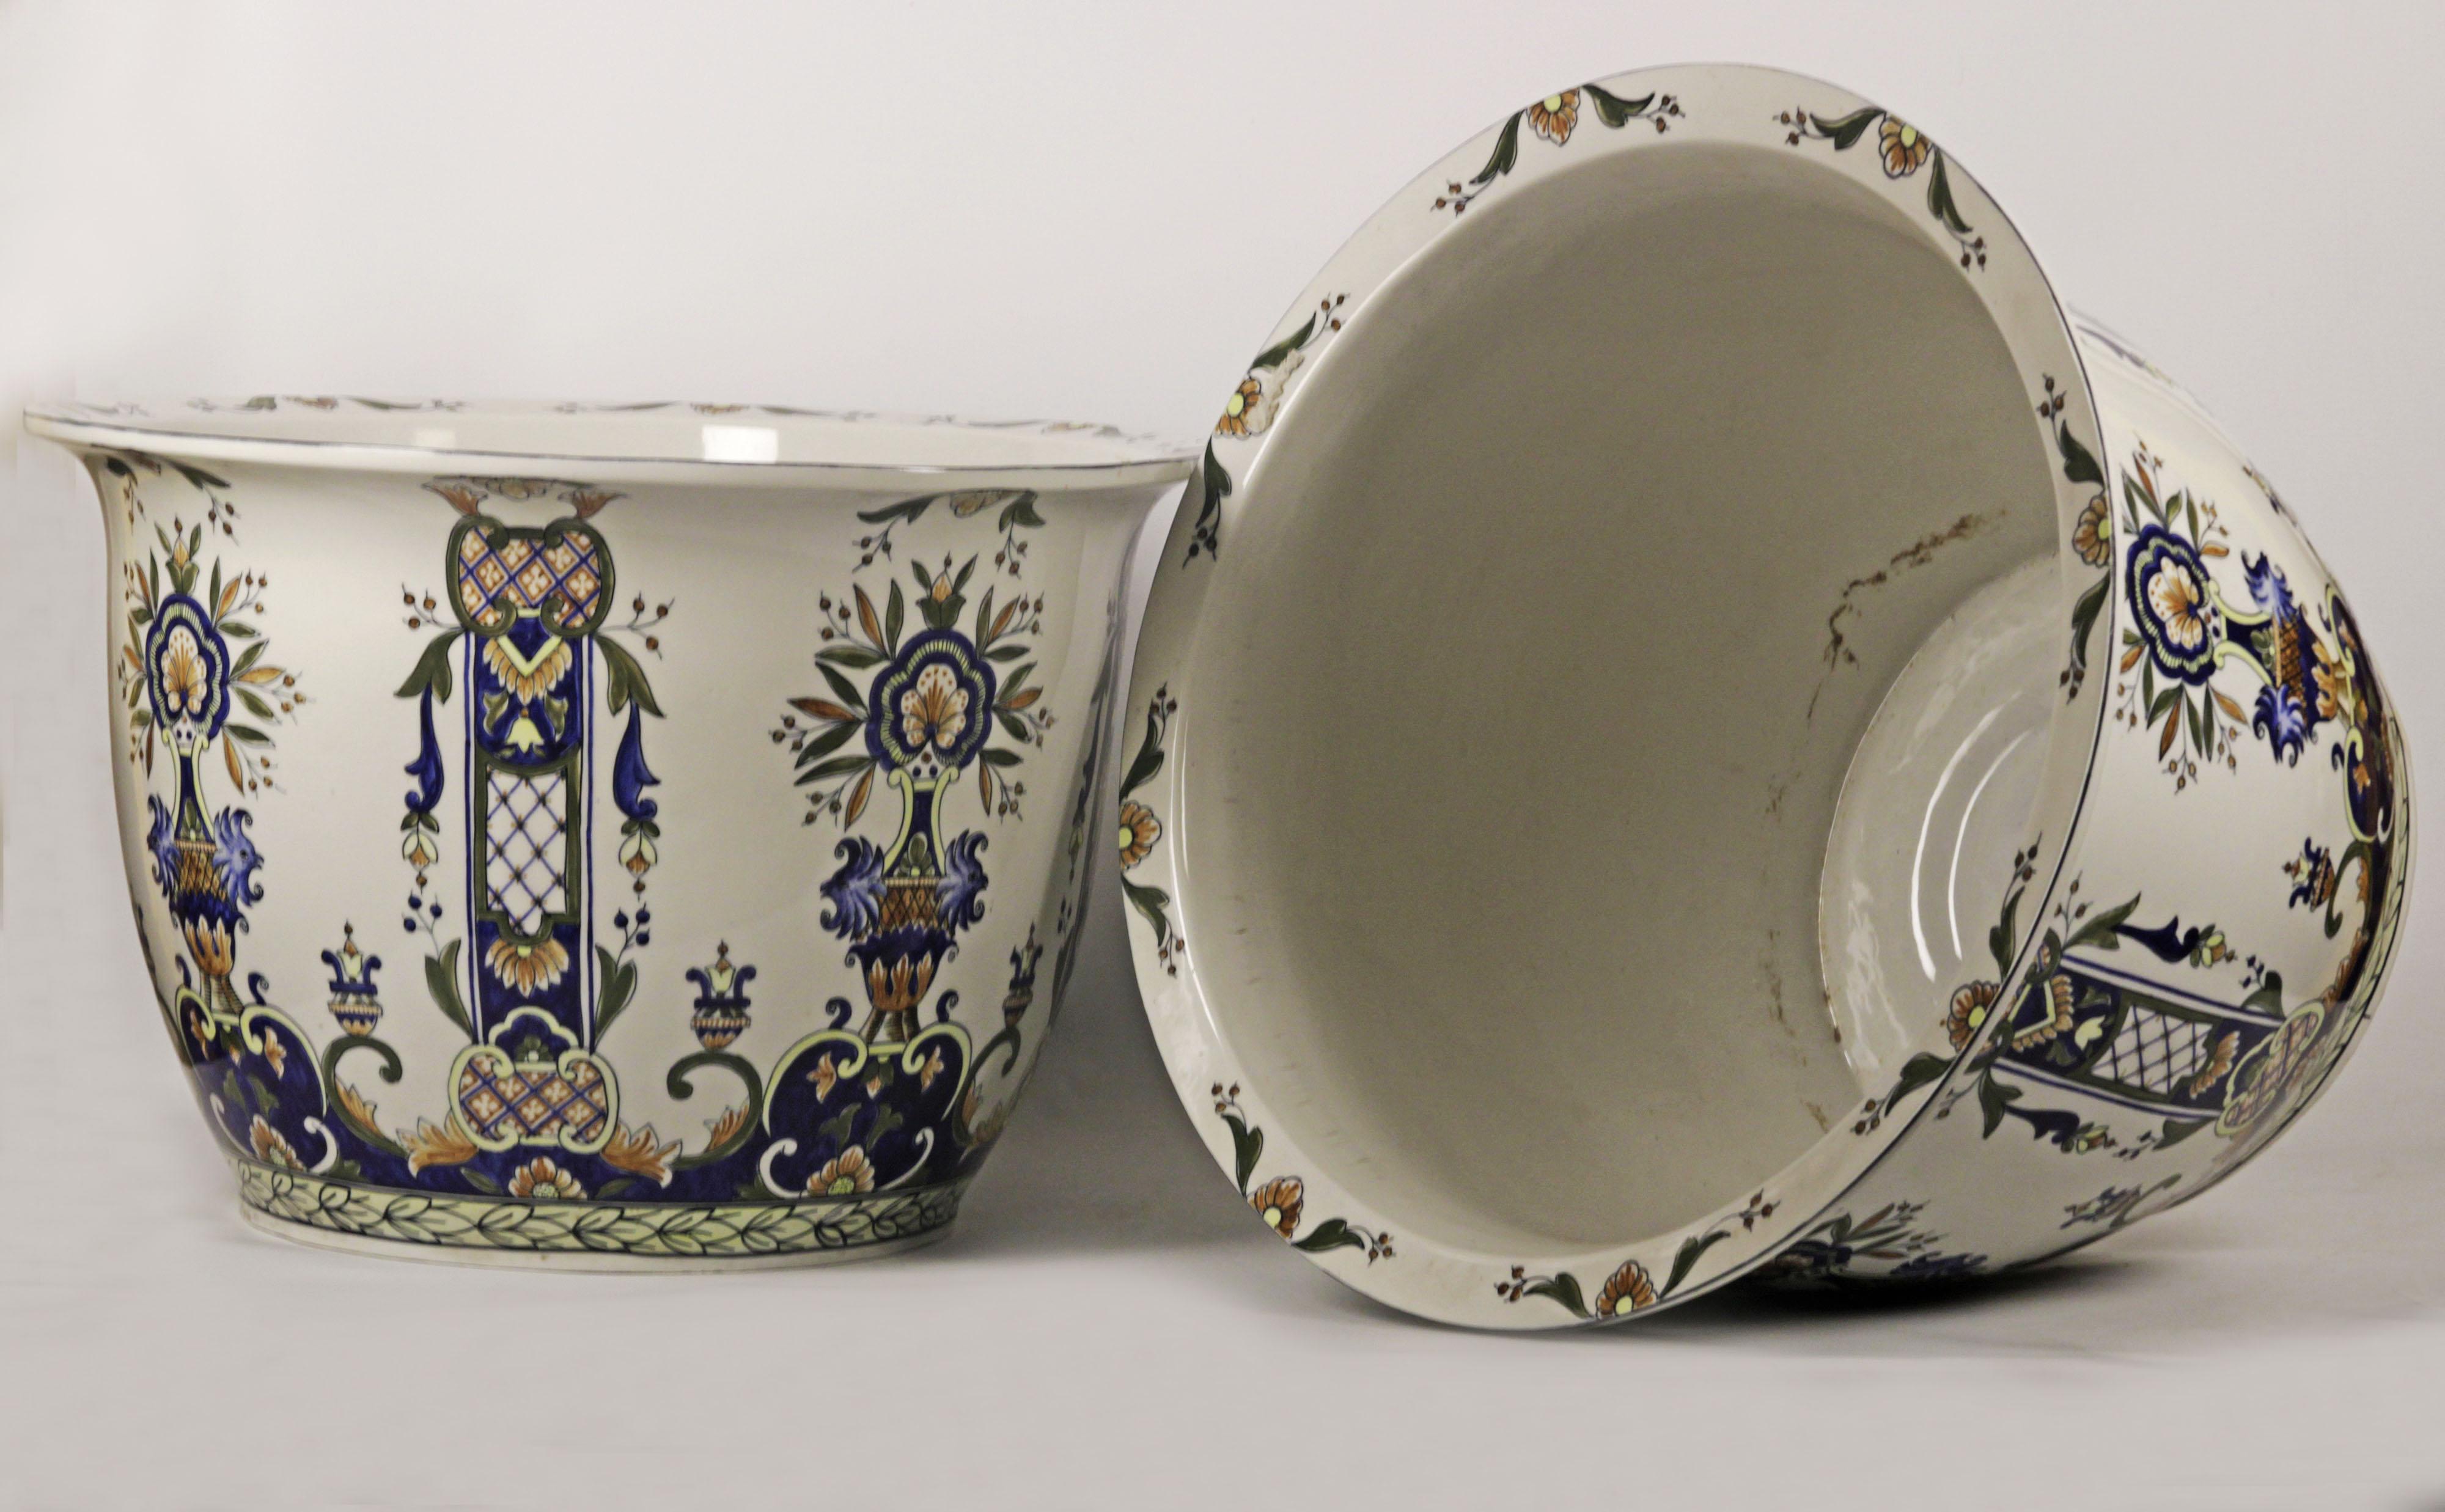 Pair of large French planters.
Origin France, circa 1900.
Attributed roun.
Excellent condition. Material: porcelain.
No restorations
In 1644, Nicolas Poirel, sieur (lord) of Grandval, obtained a fifty-year royal monopoly on the production of faience